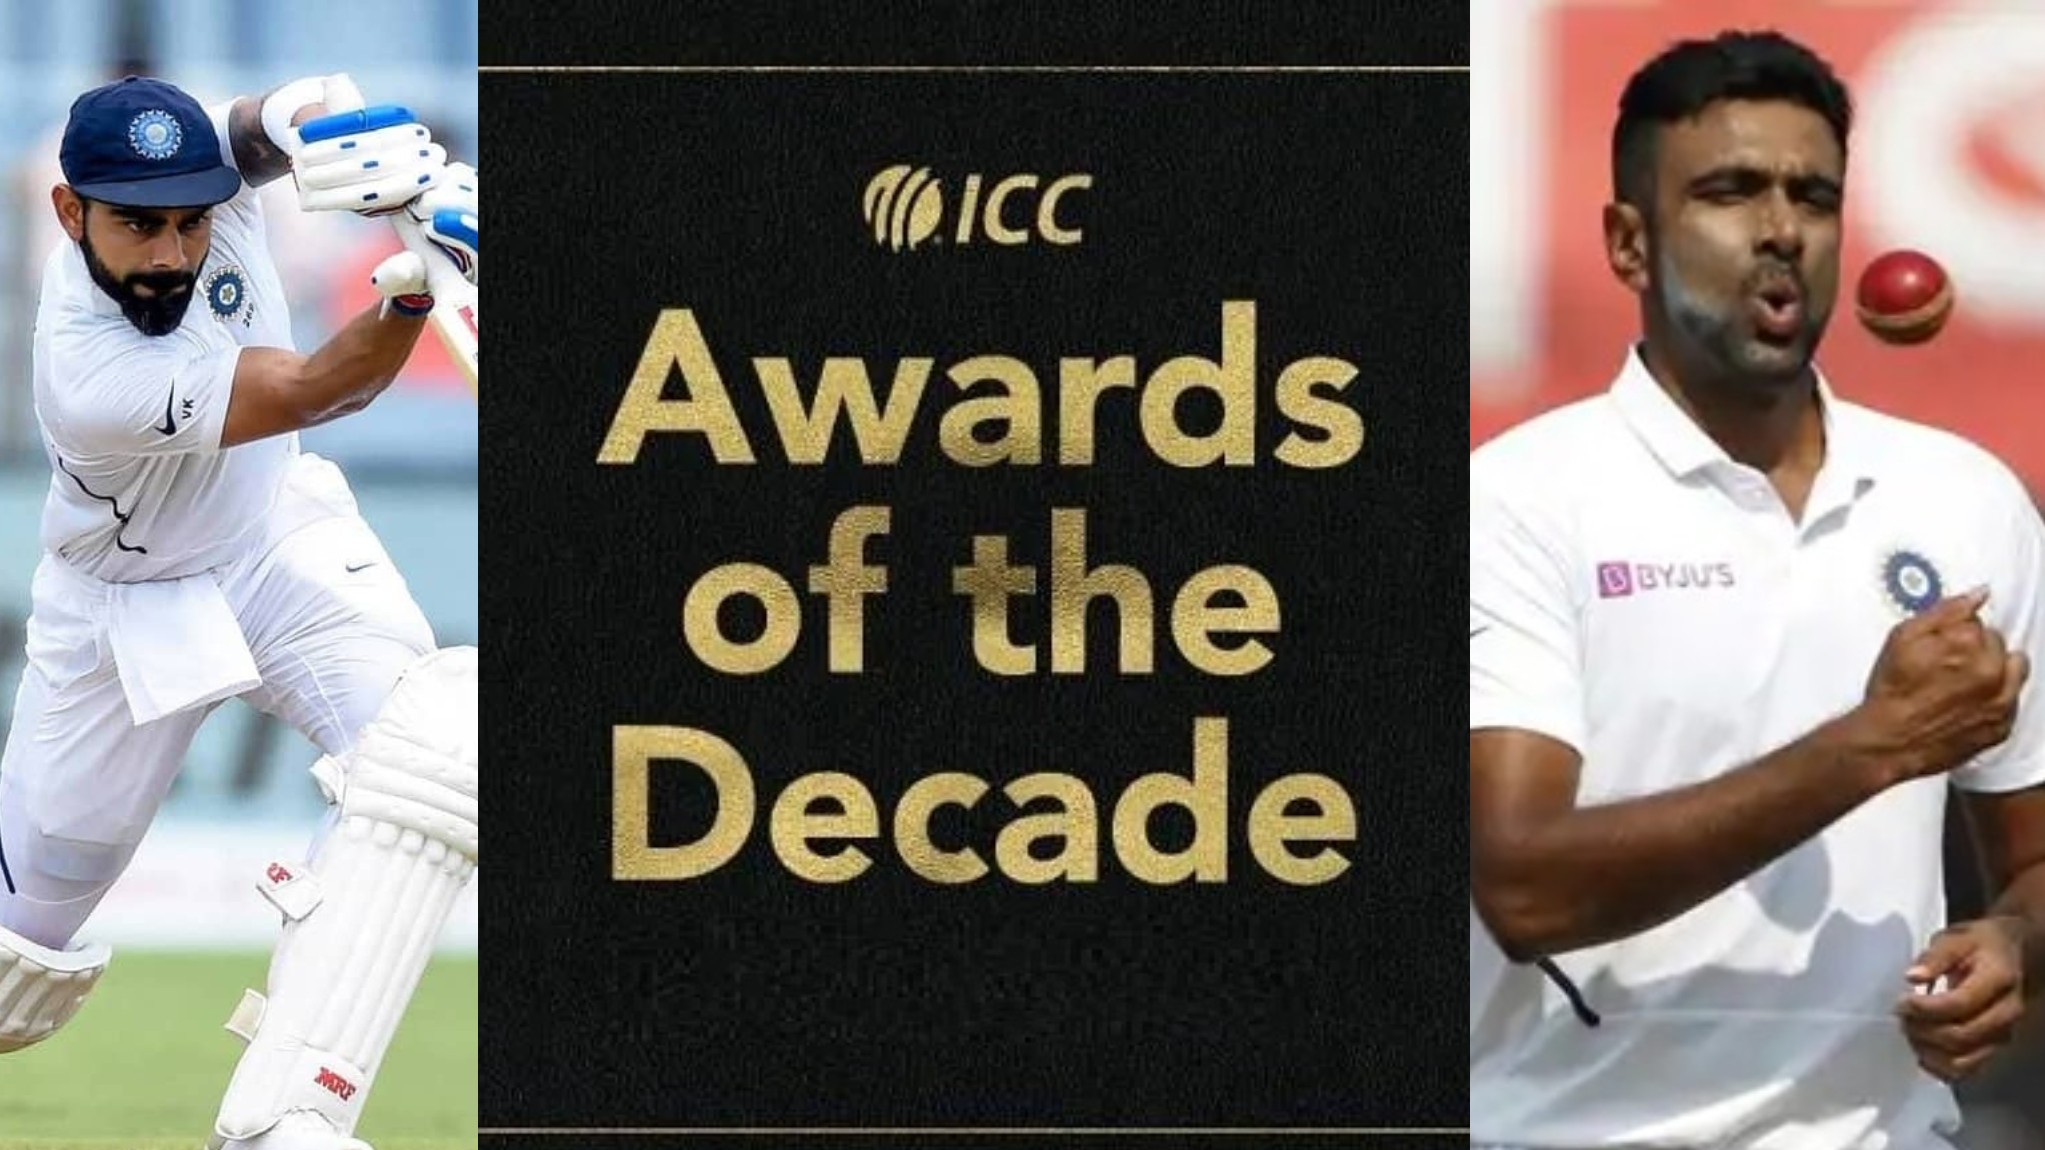 Virat Kohli and R Ashwin nominated for ICC Player of the Decade award